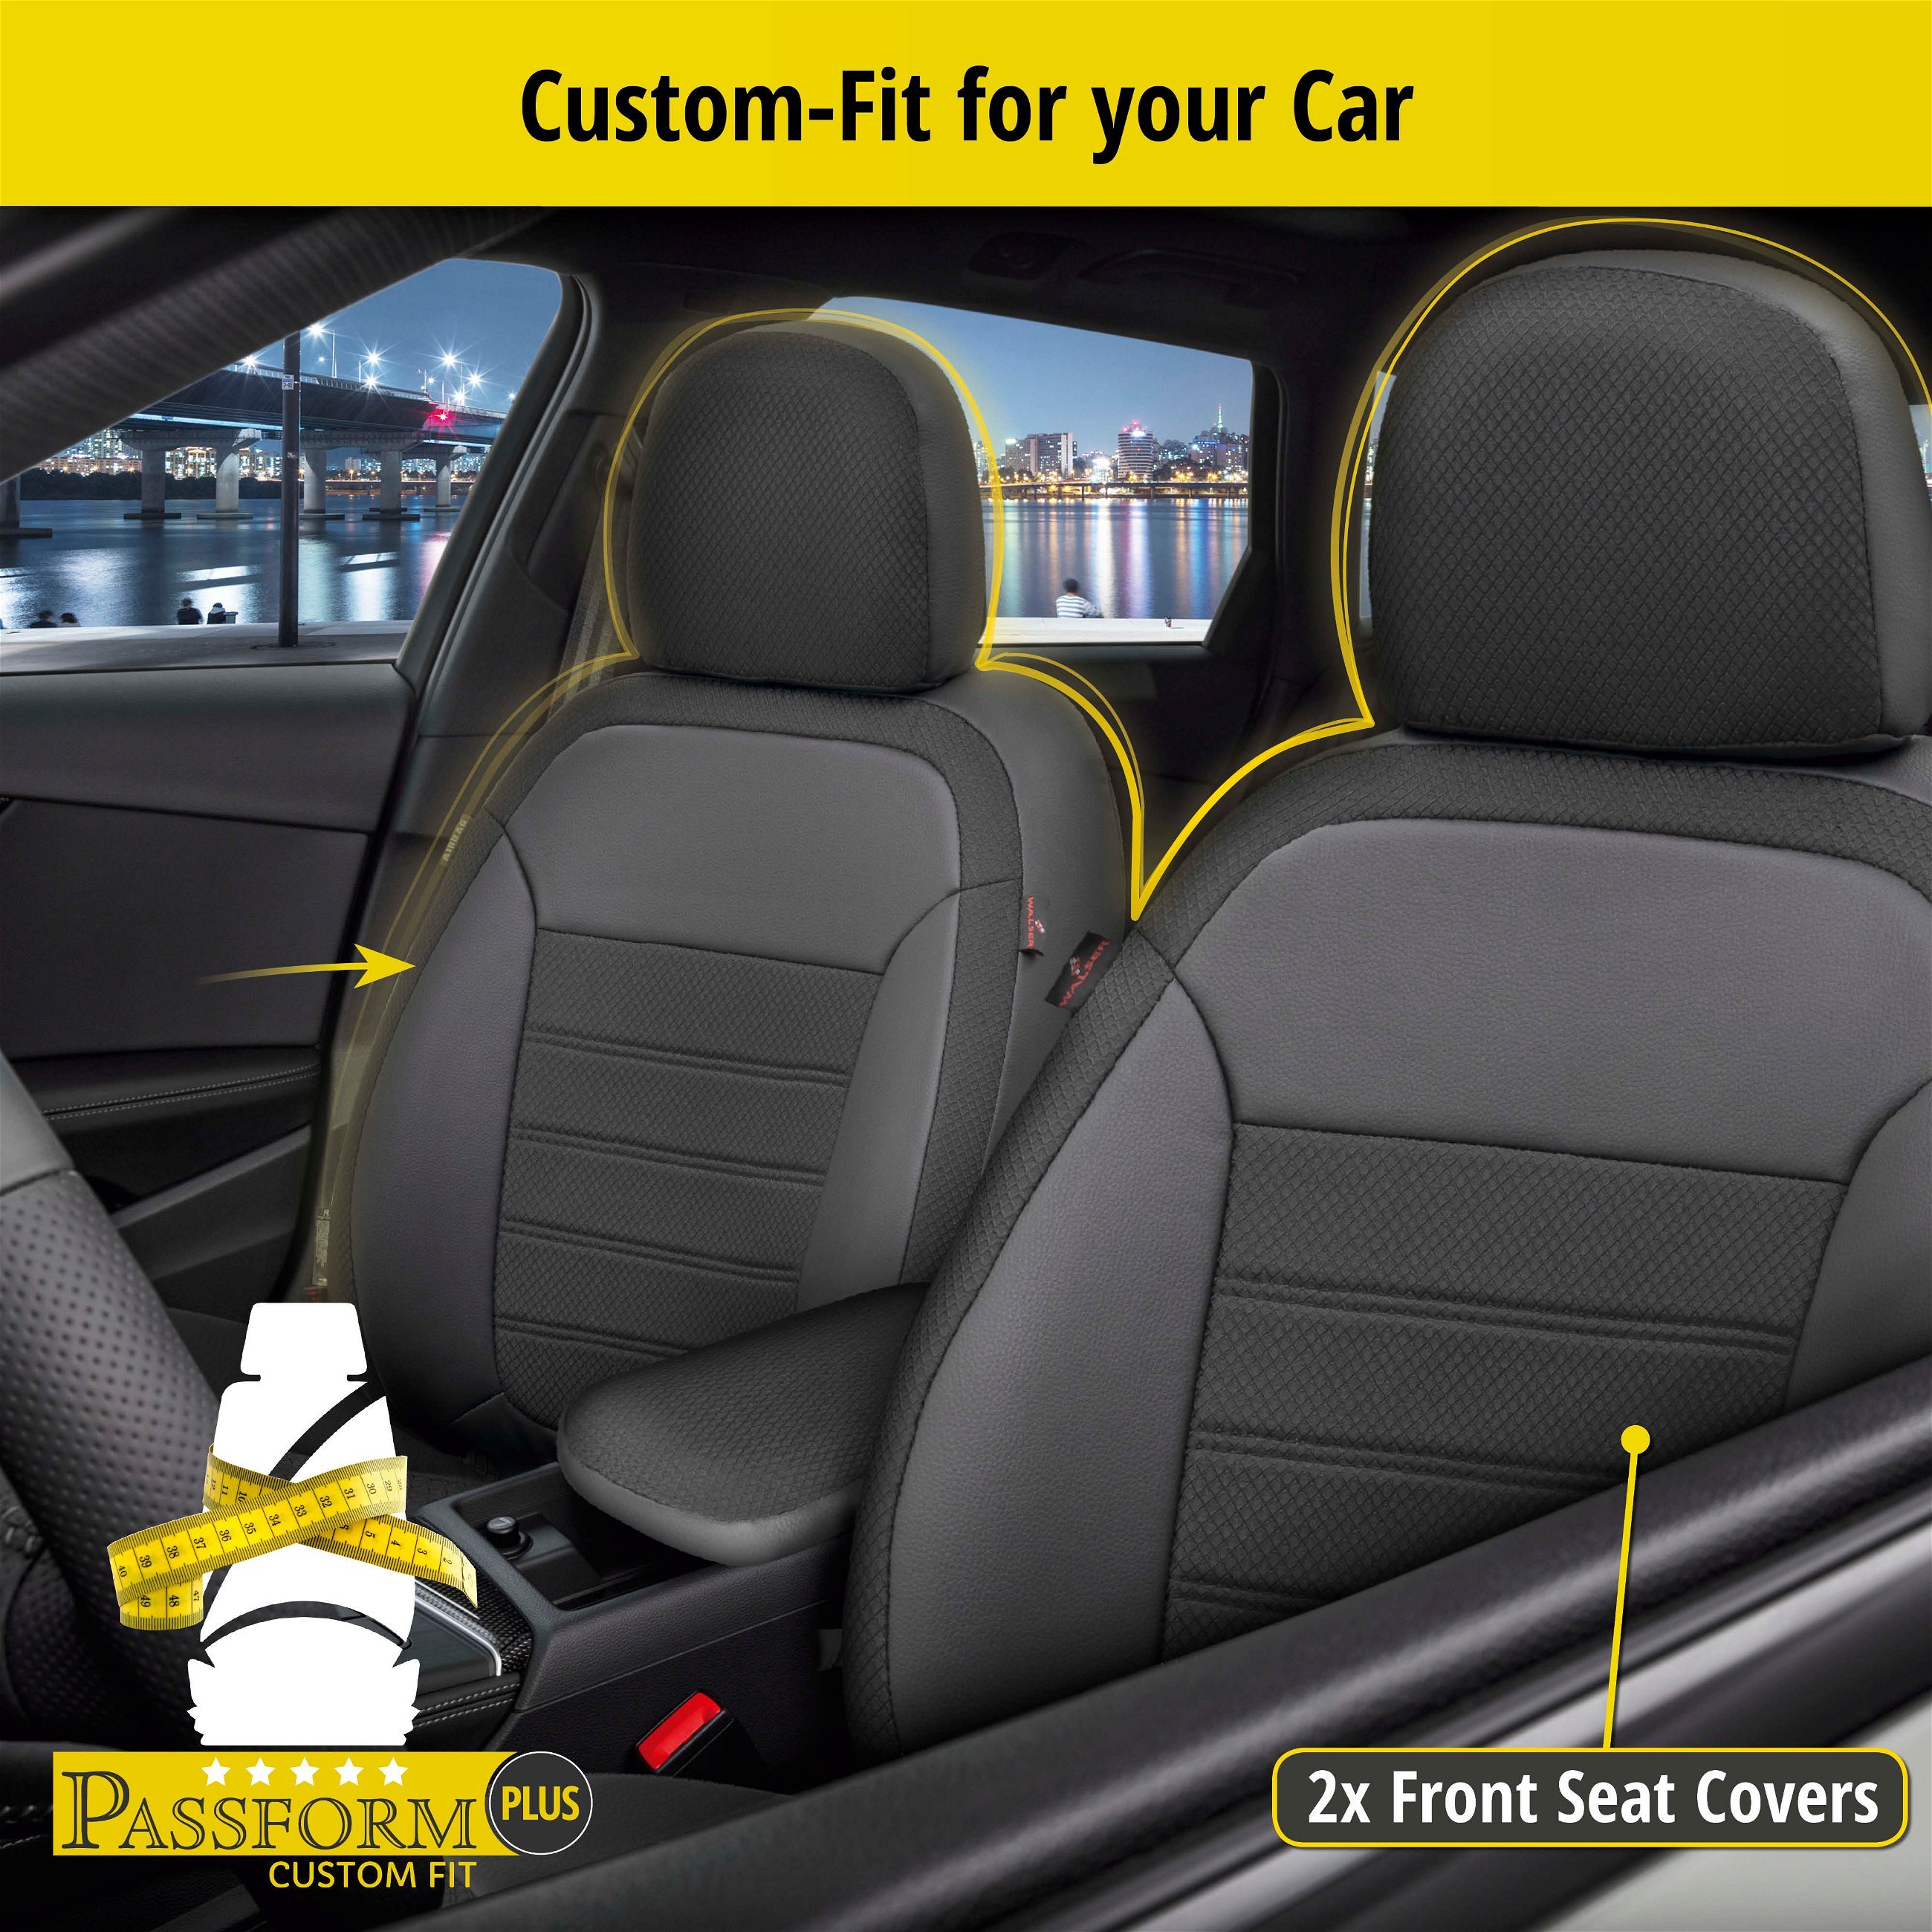 Seat Cover Aversa for Toyota Yaris (P9) 01/2005-12/2014, 2 seat covers for normal seats